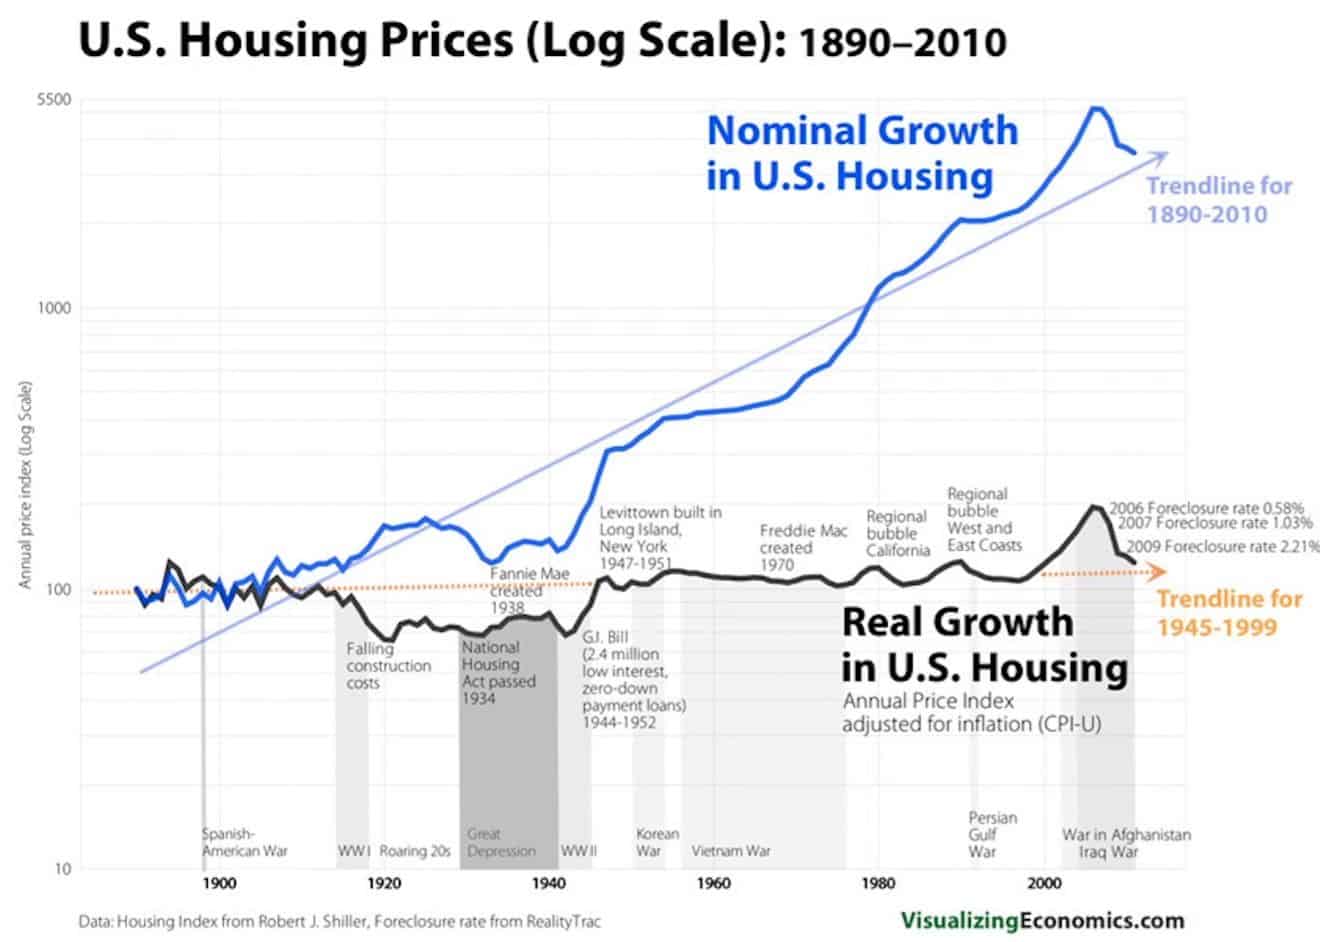 The US housing prices chart from 1890 - 2010